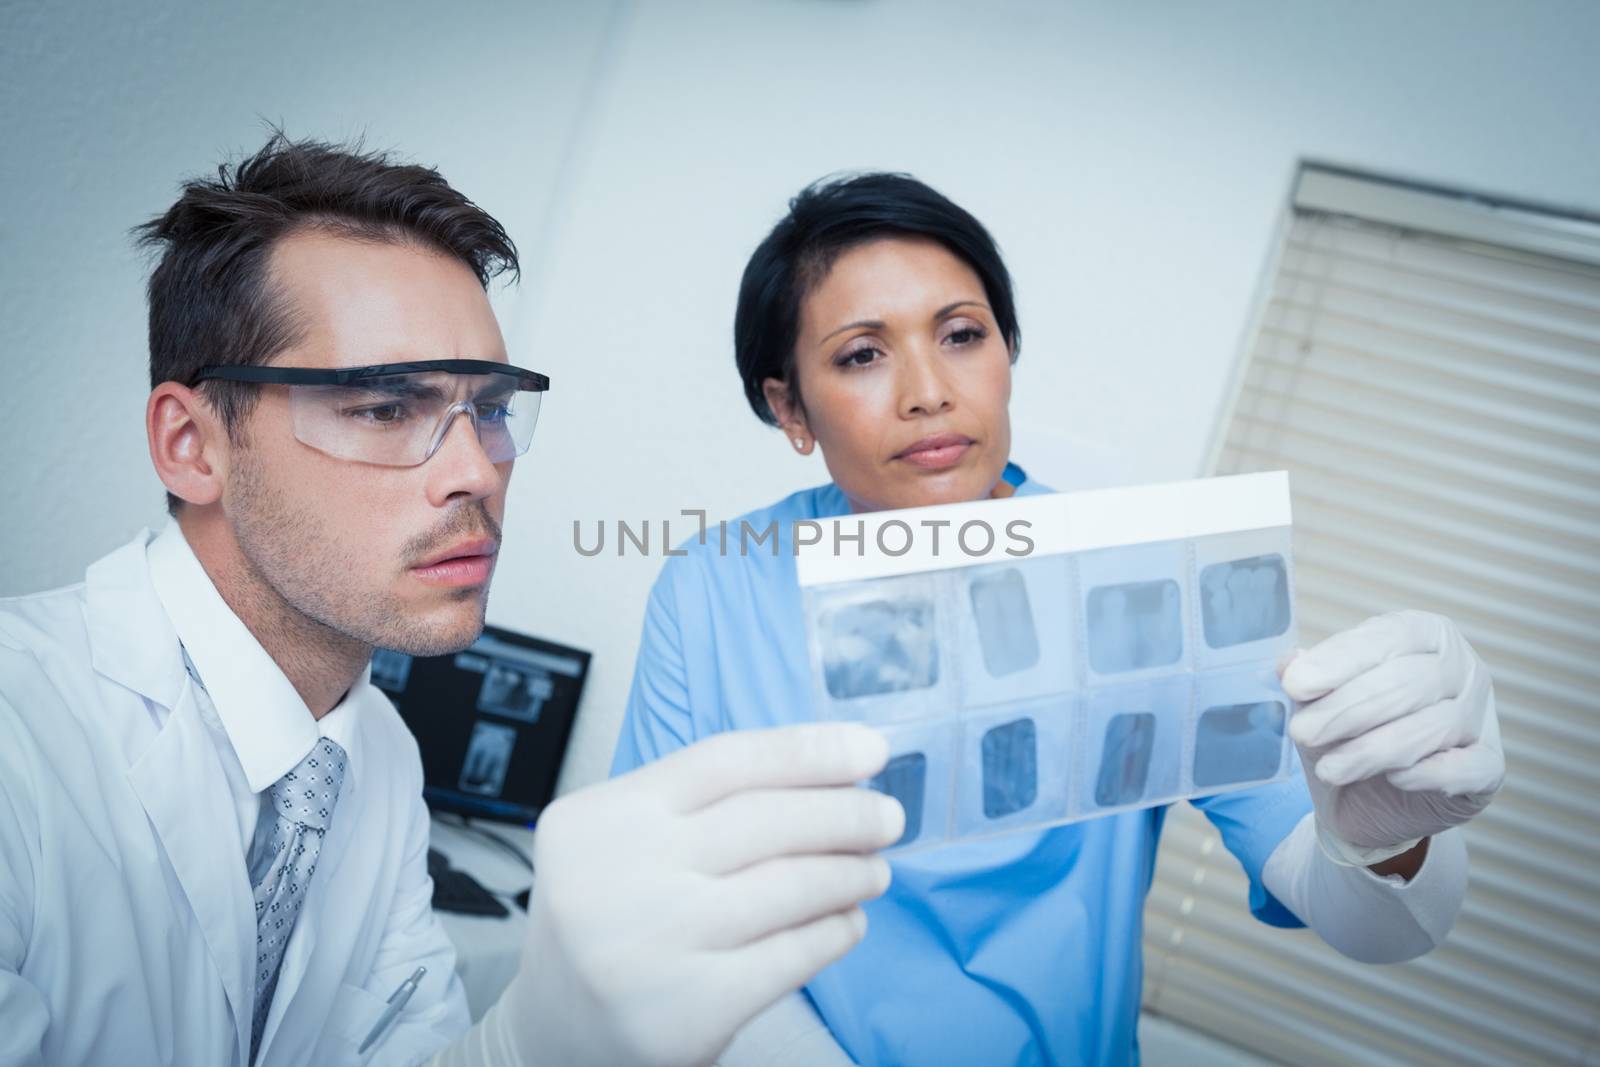 Concentrated two dentists looking at x-ray